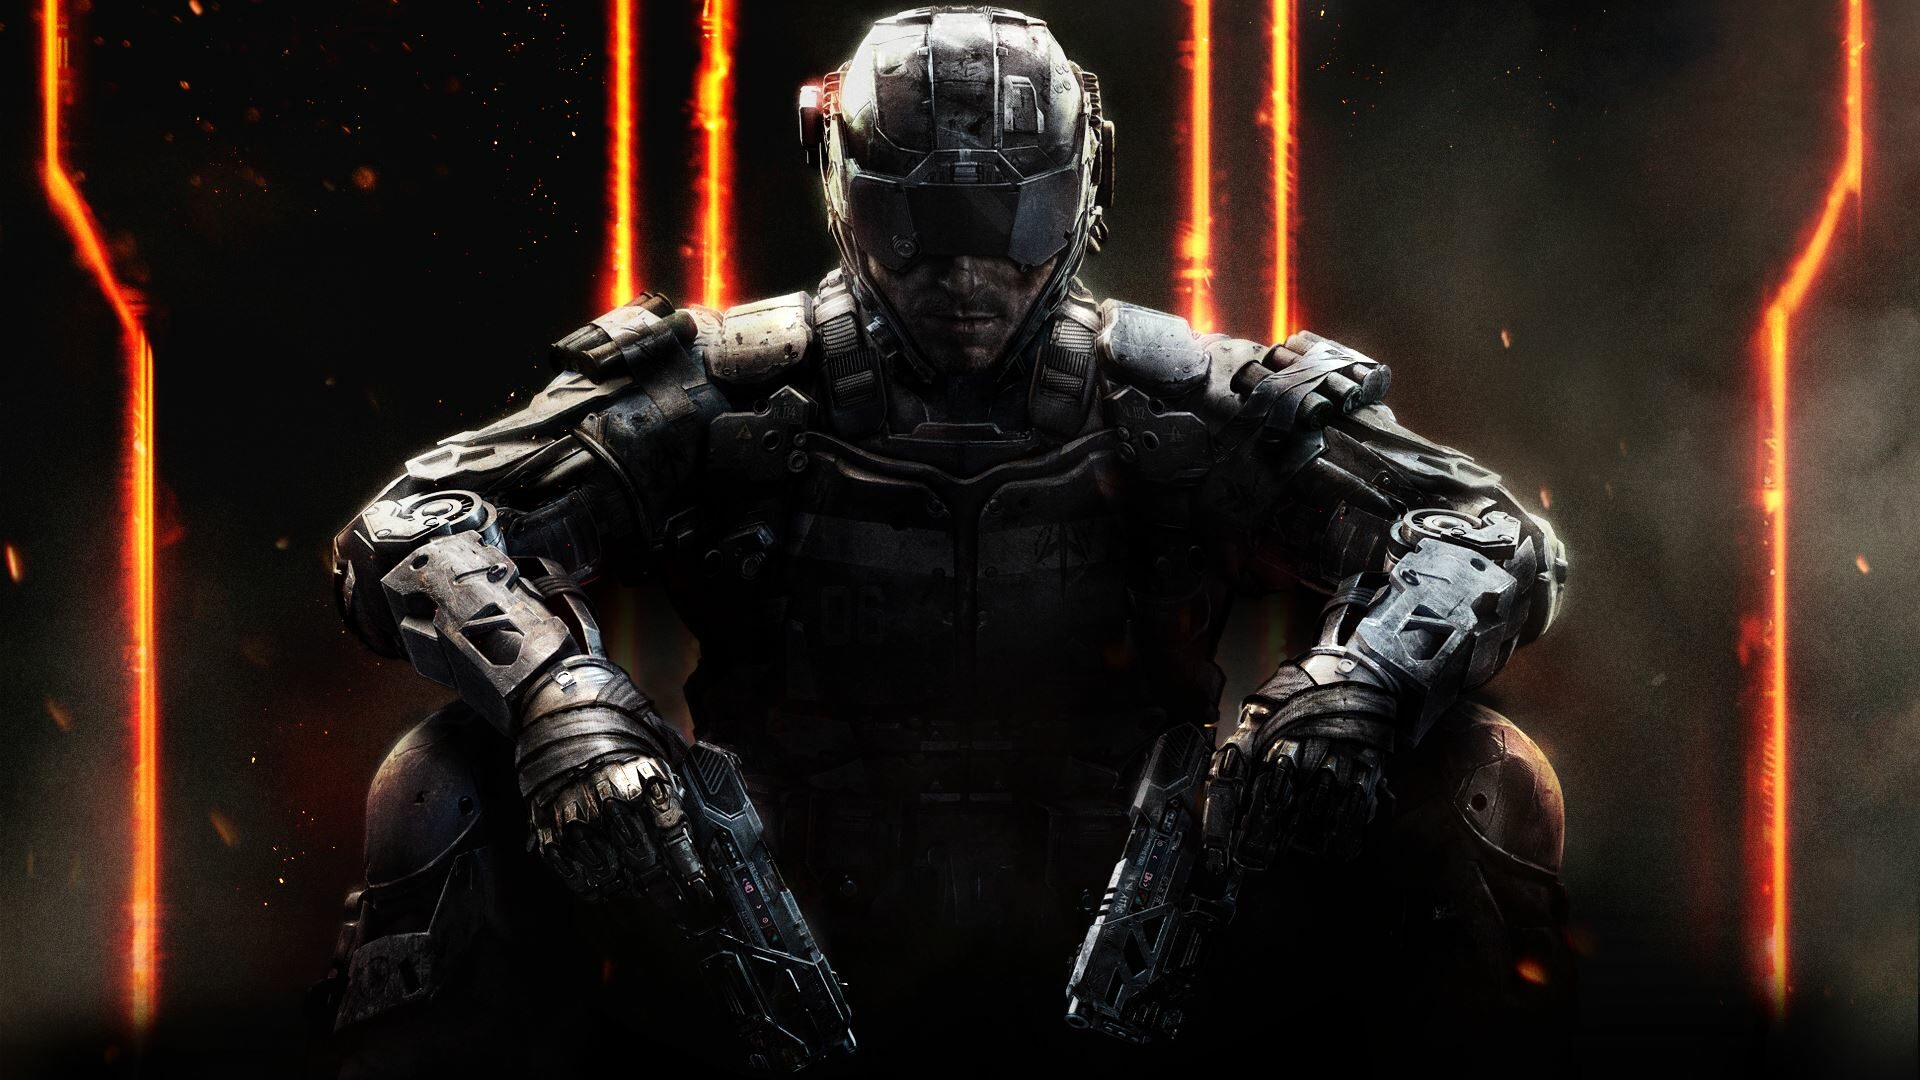 Call of Duty Black Ops 3 Patch Notes for the week of 9/5/2016